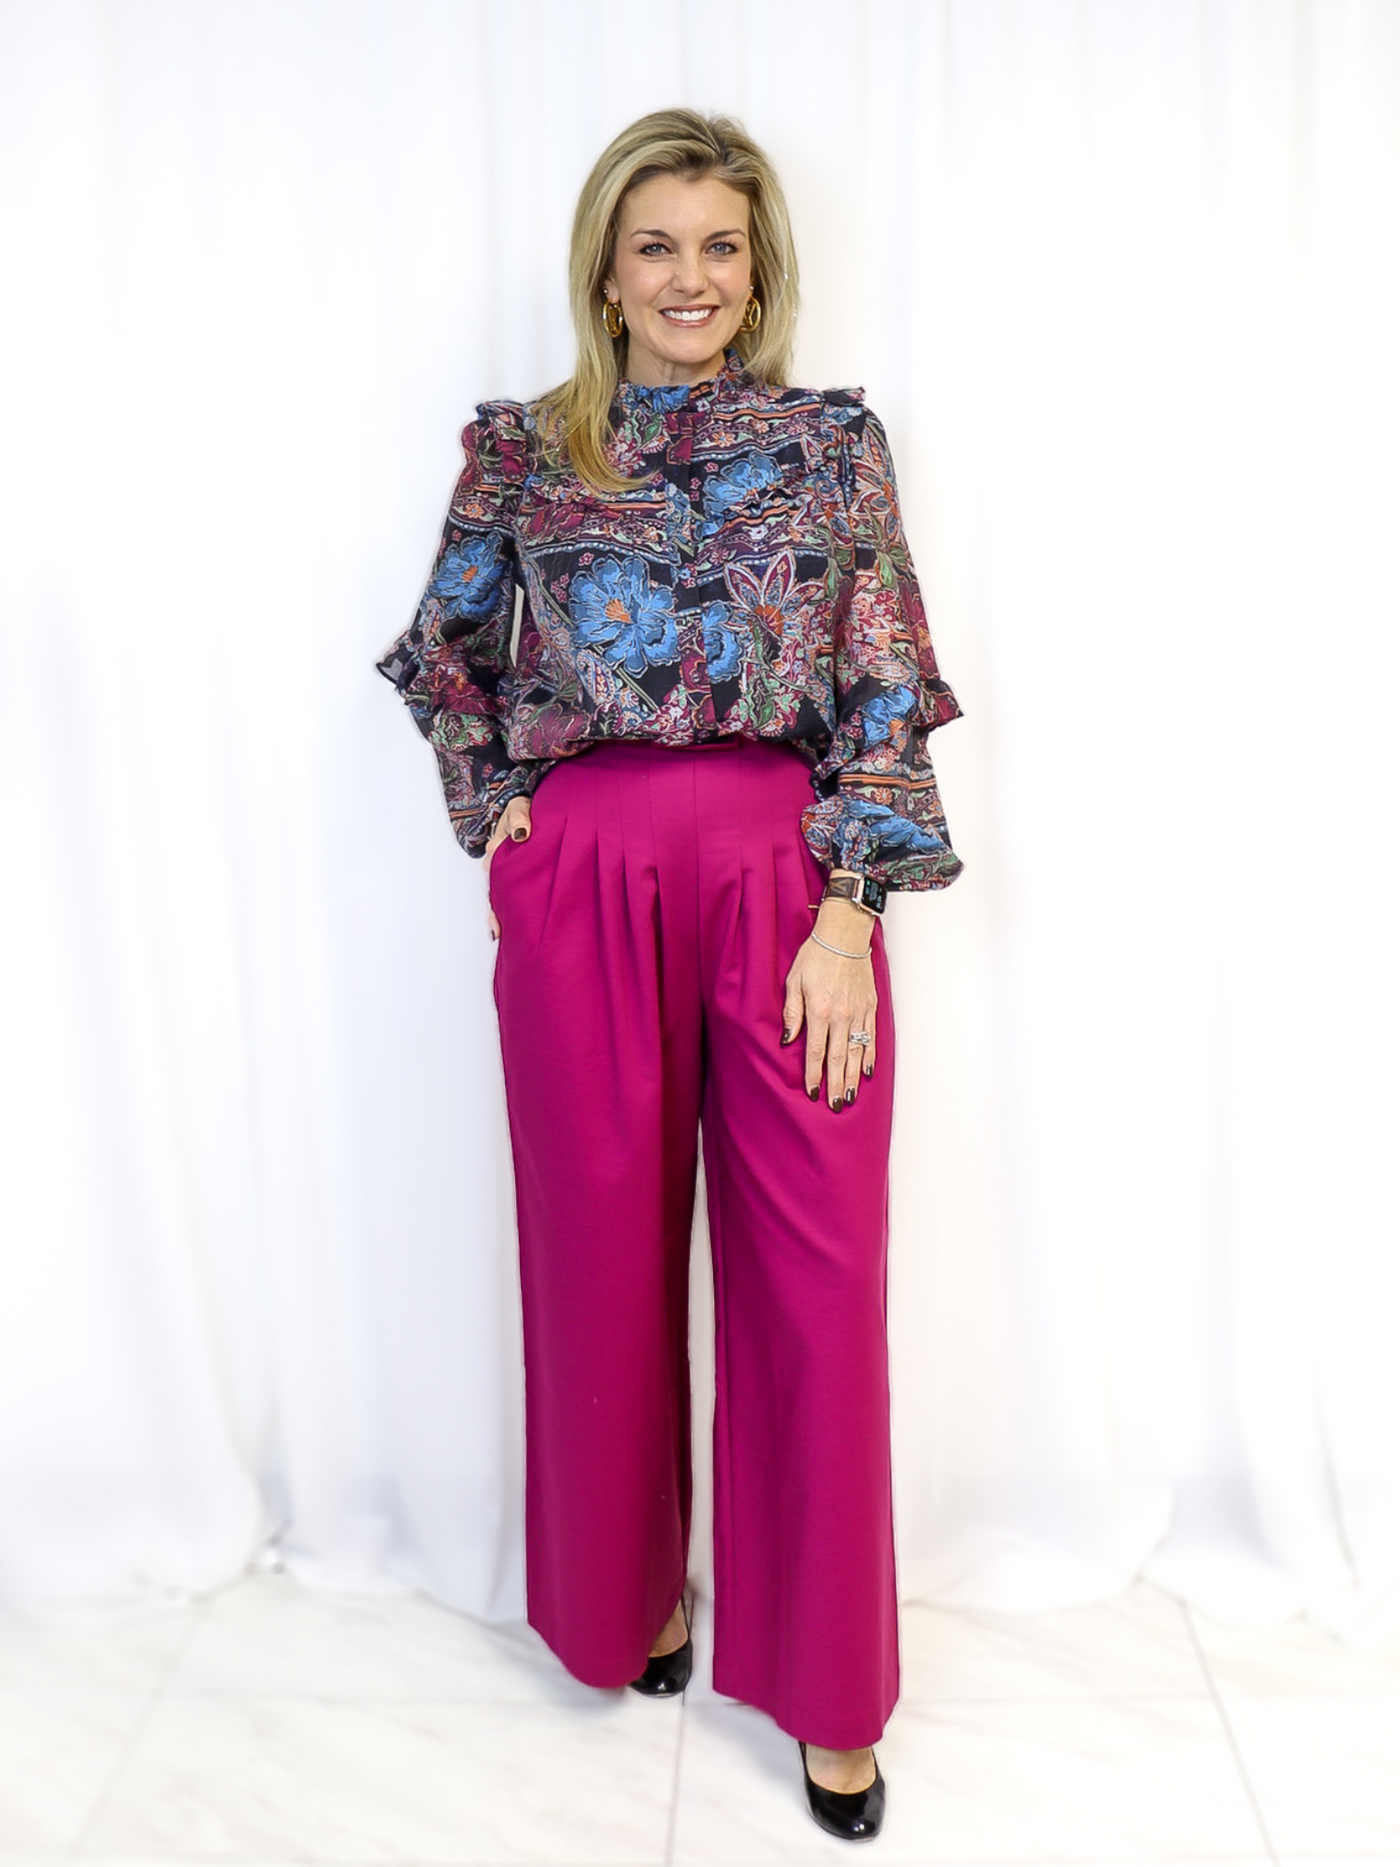 Fate Ruffle Trimmed Mixed Print Blouse - Multi front view with pink dress pants.